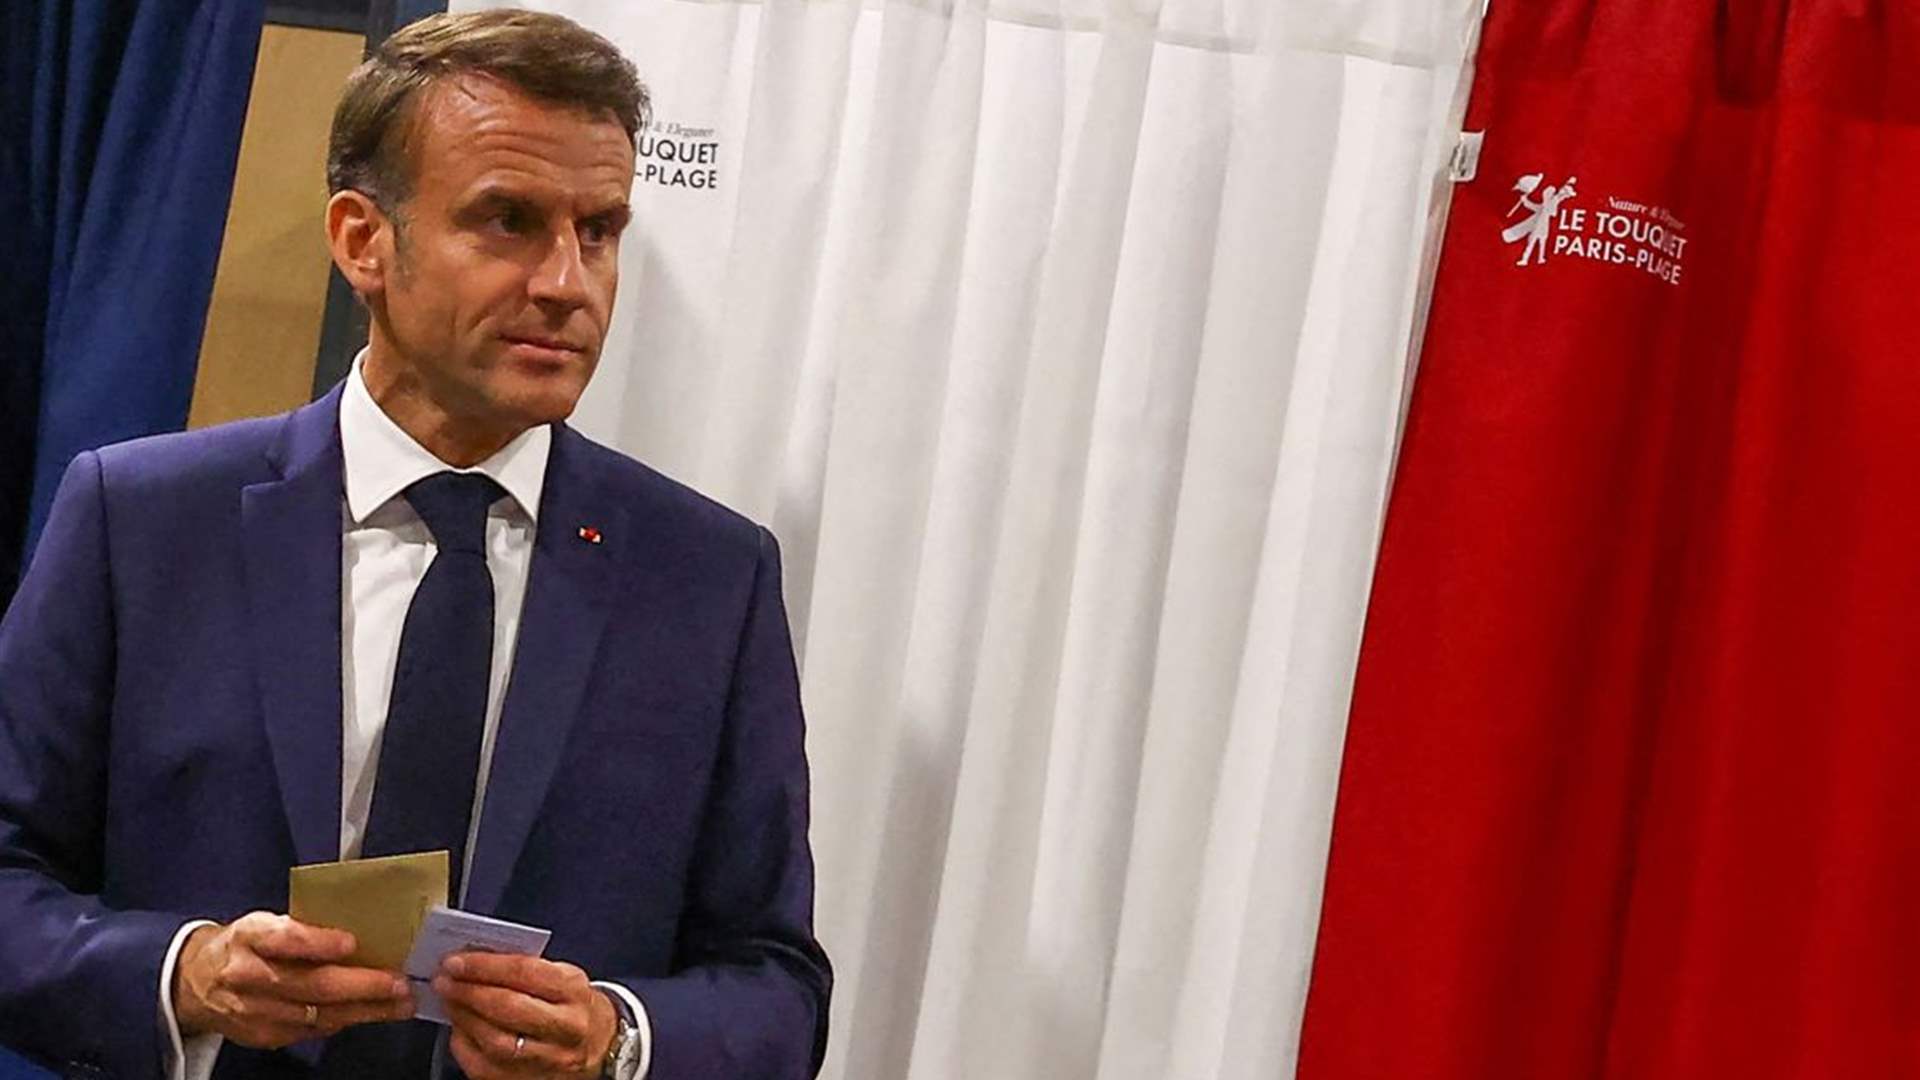 Macron asks backing from all &#39;able to say no to extremes&#39; in snap vote